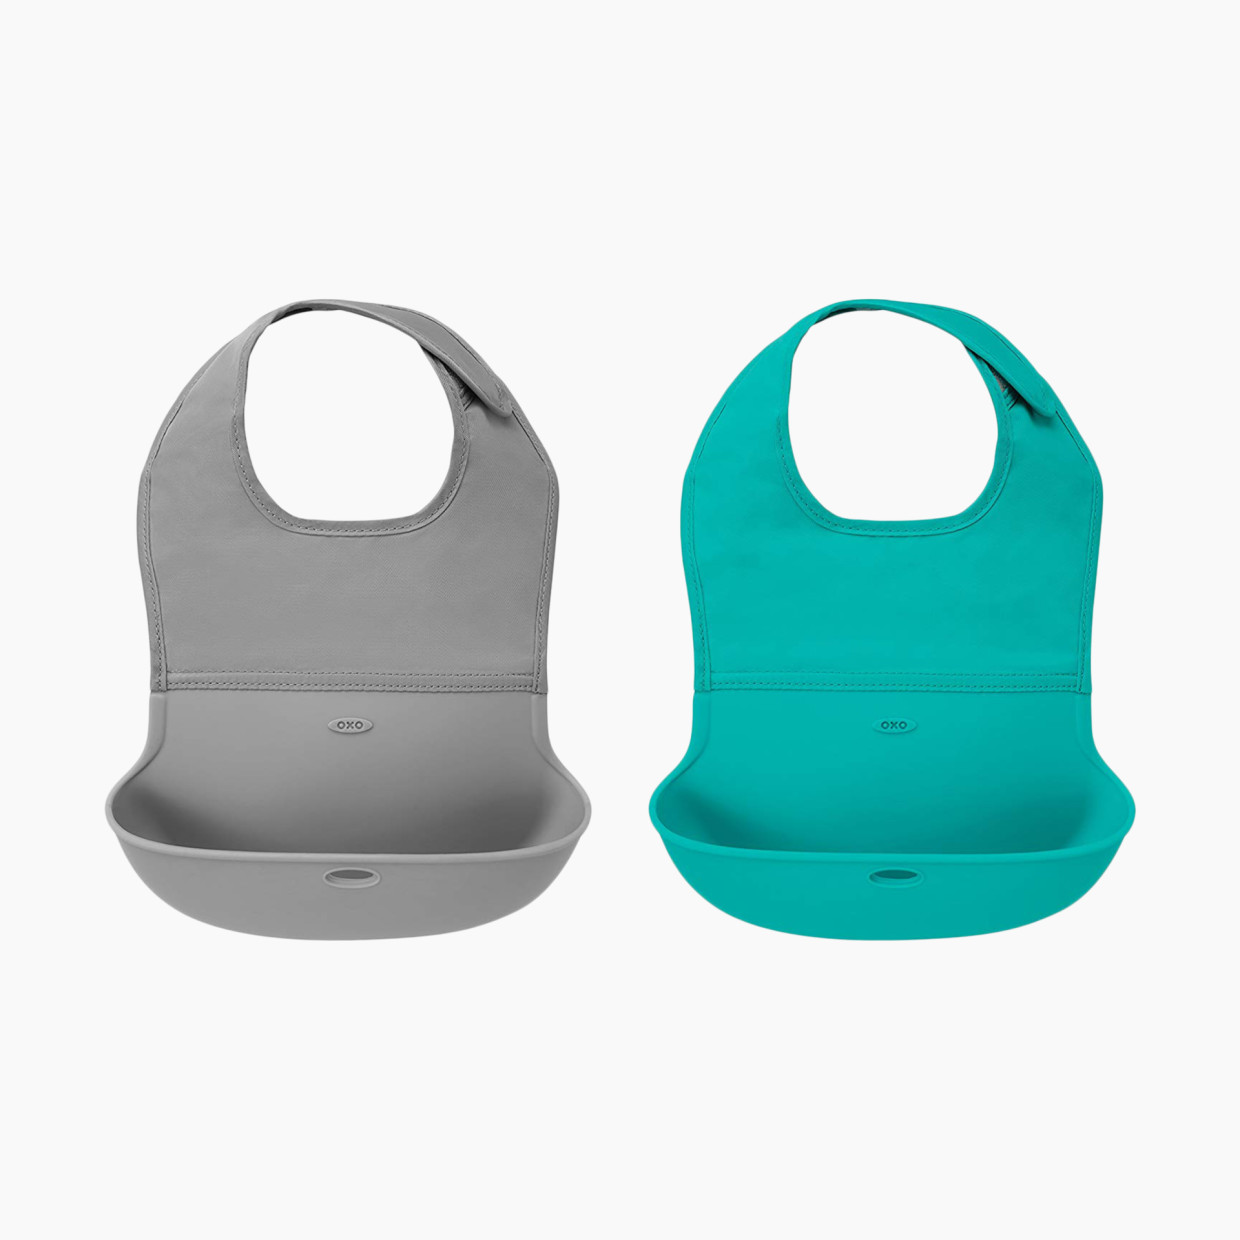 OXO Tot Roll Up Bib (2 Pack) - Grey/Teal.